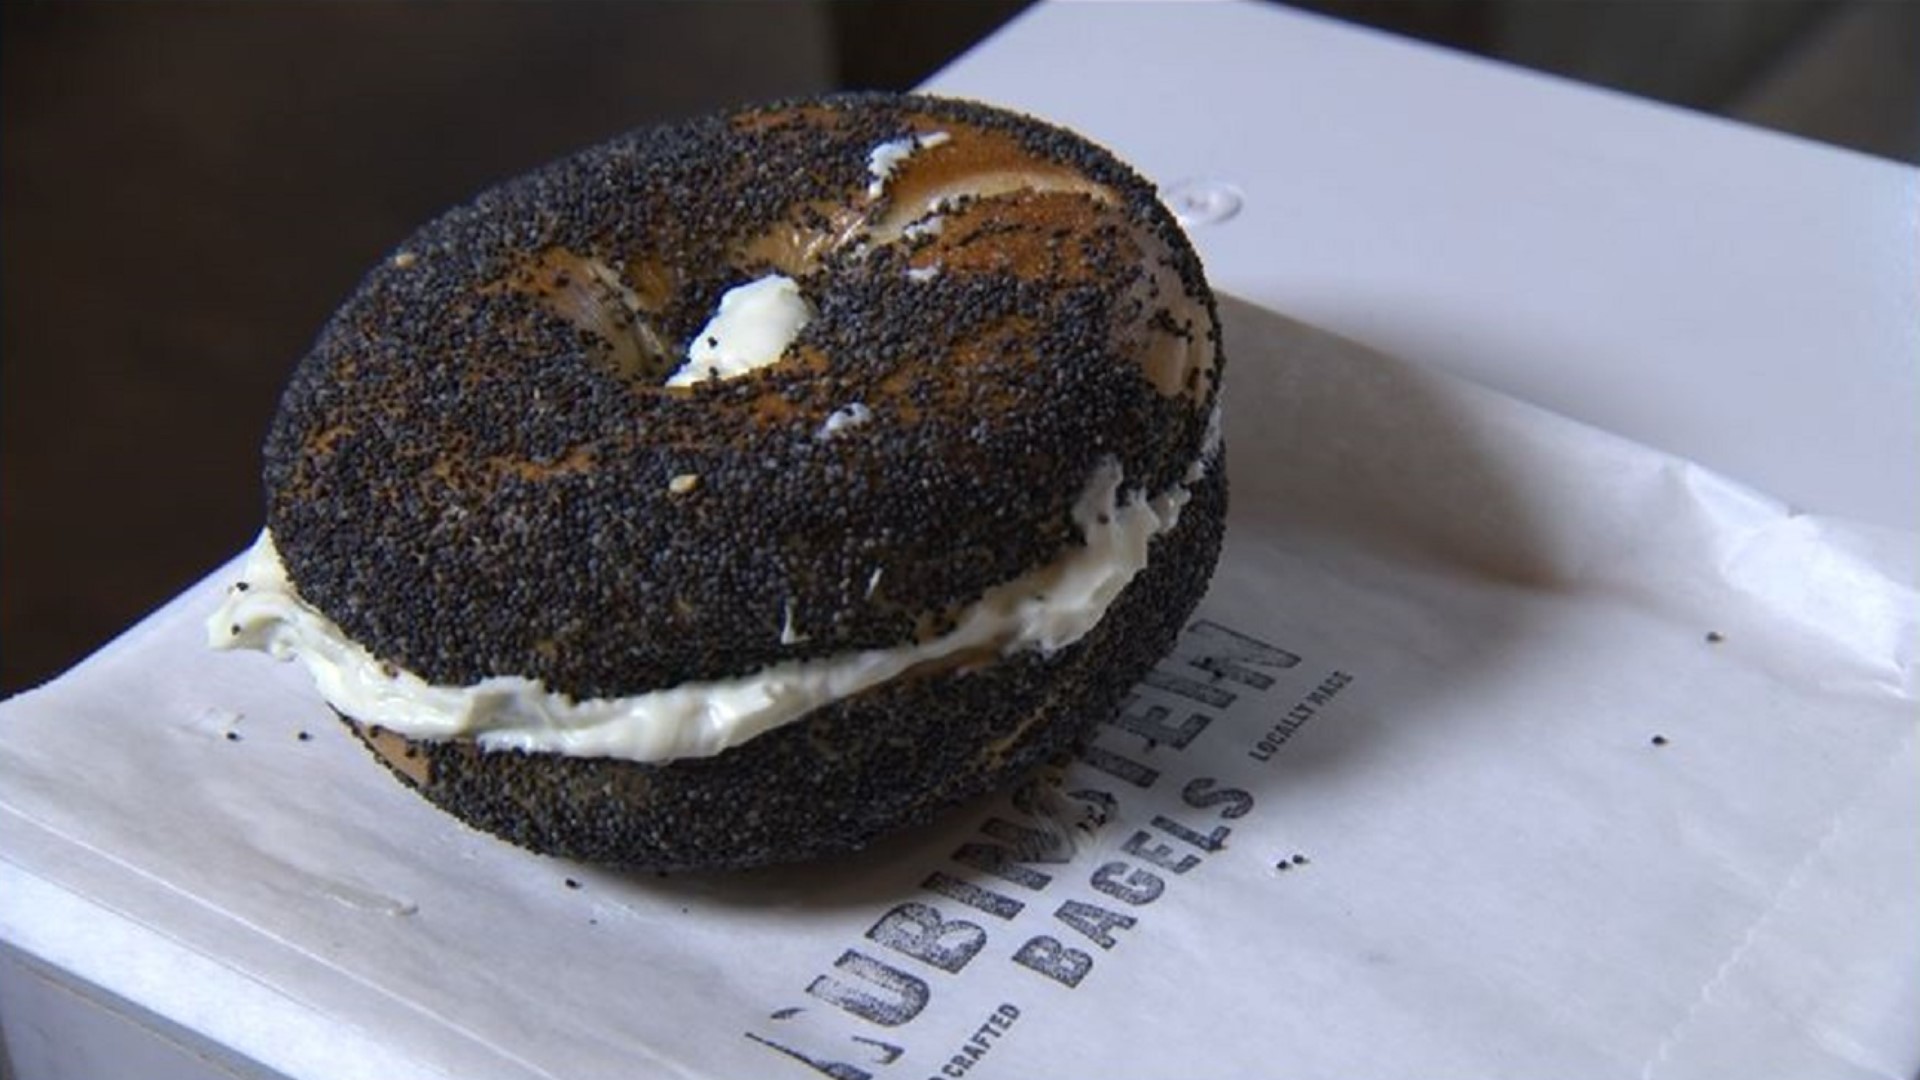 Rubinstein Bagels specialize in chewy, crusty bagels with a variety of schmears